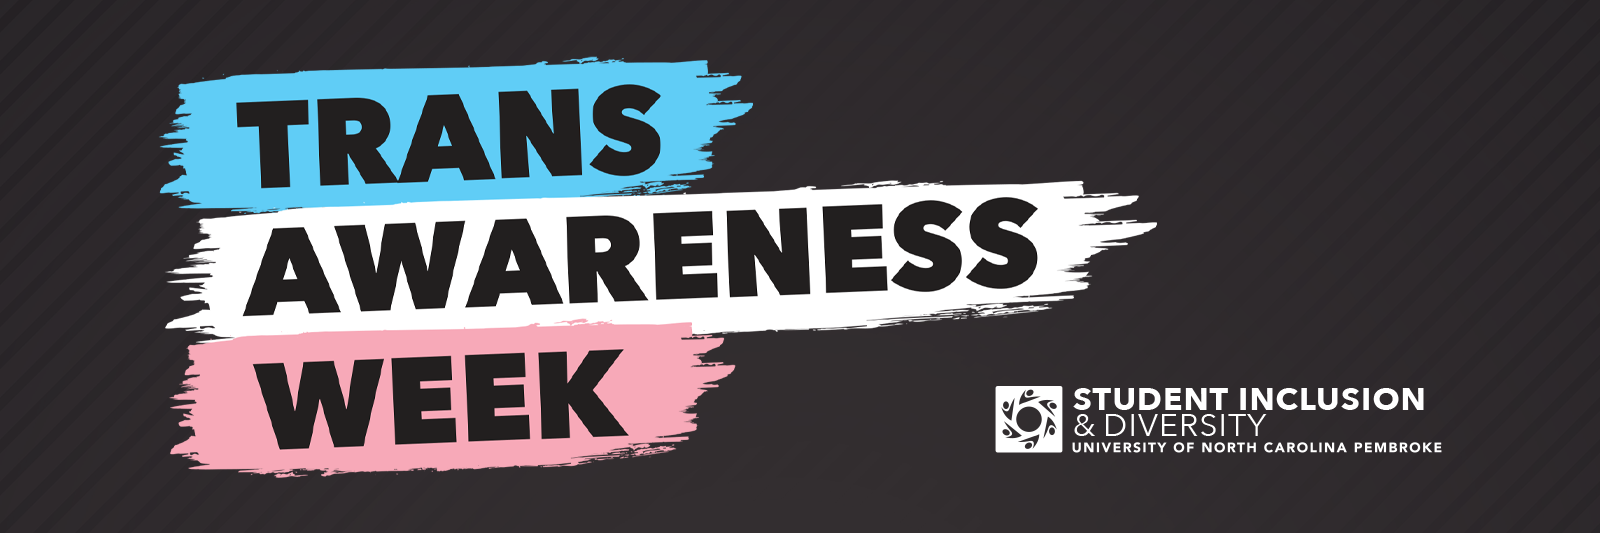 A blue brush stroke with "Trans" written in black; a white brush stroke with "Awareness" written in black; a pink brush stroke with "Week" written in black, accompanied by the Office of Student Inclusion and Diversity Logo